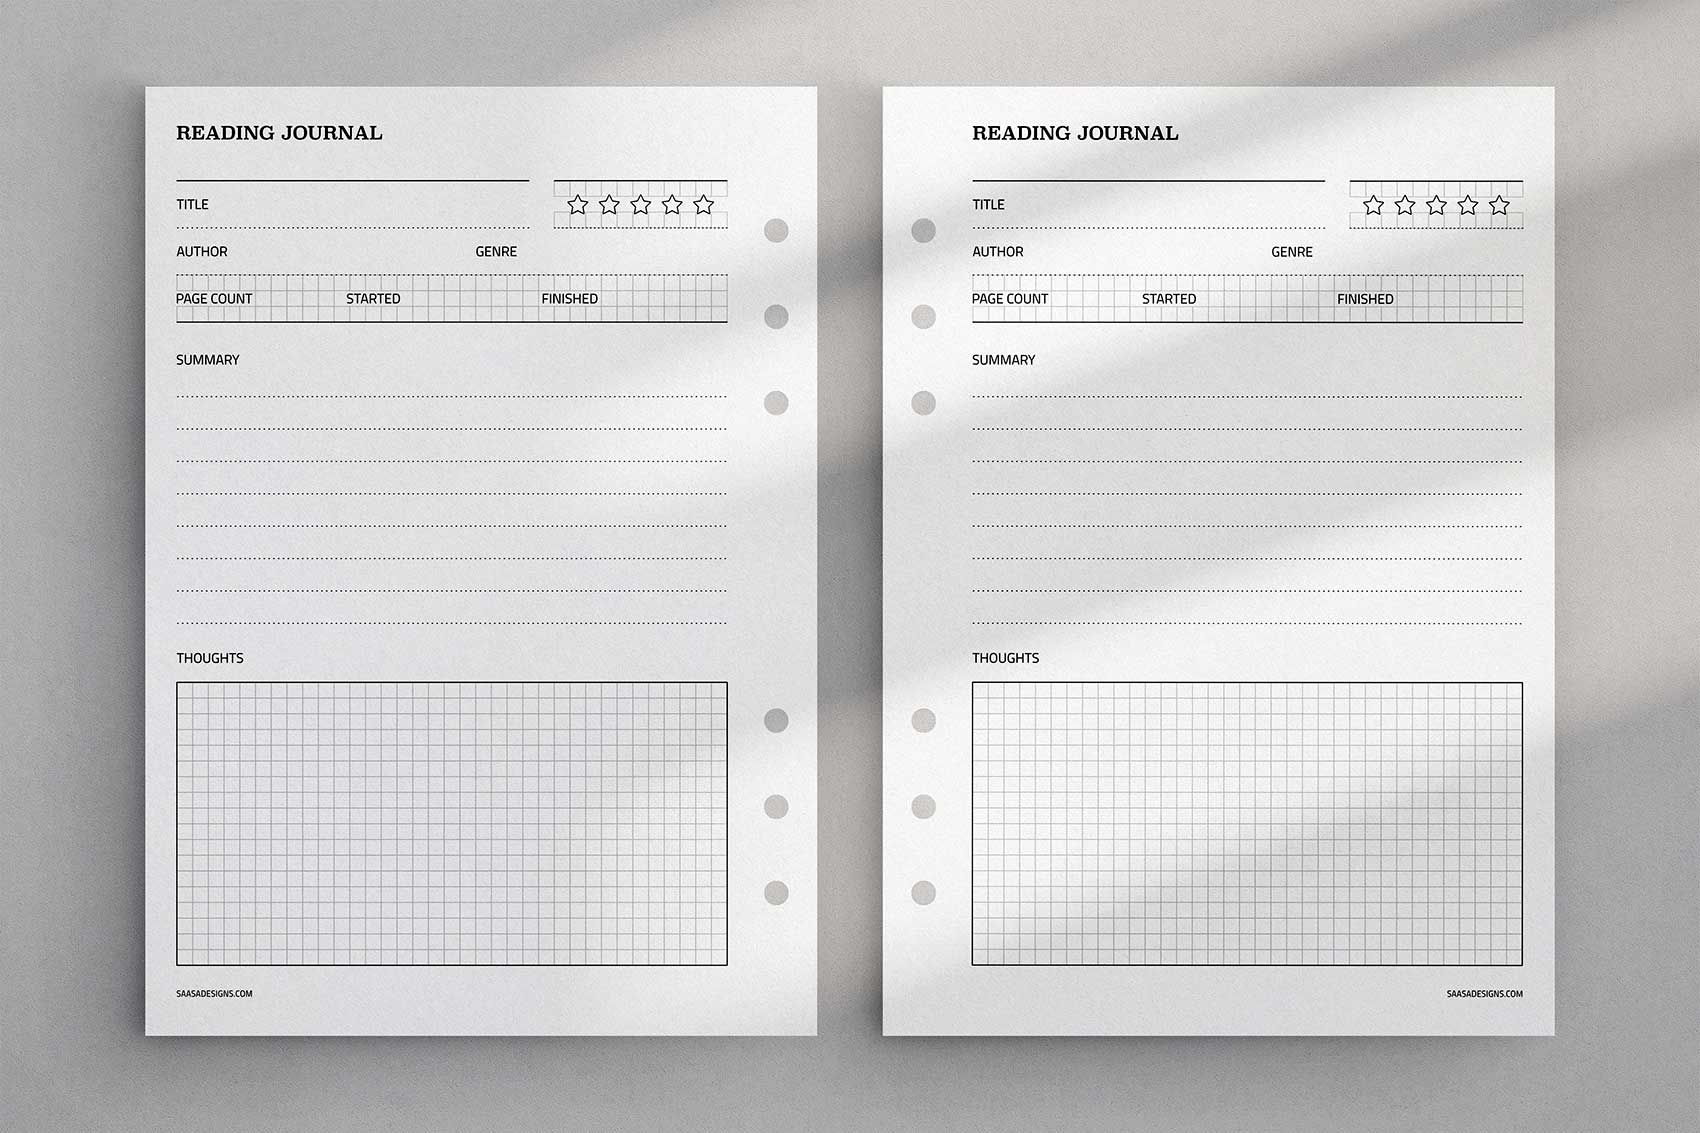 Printable Reading Journal Template